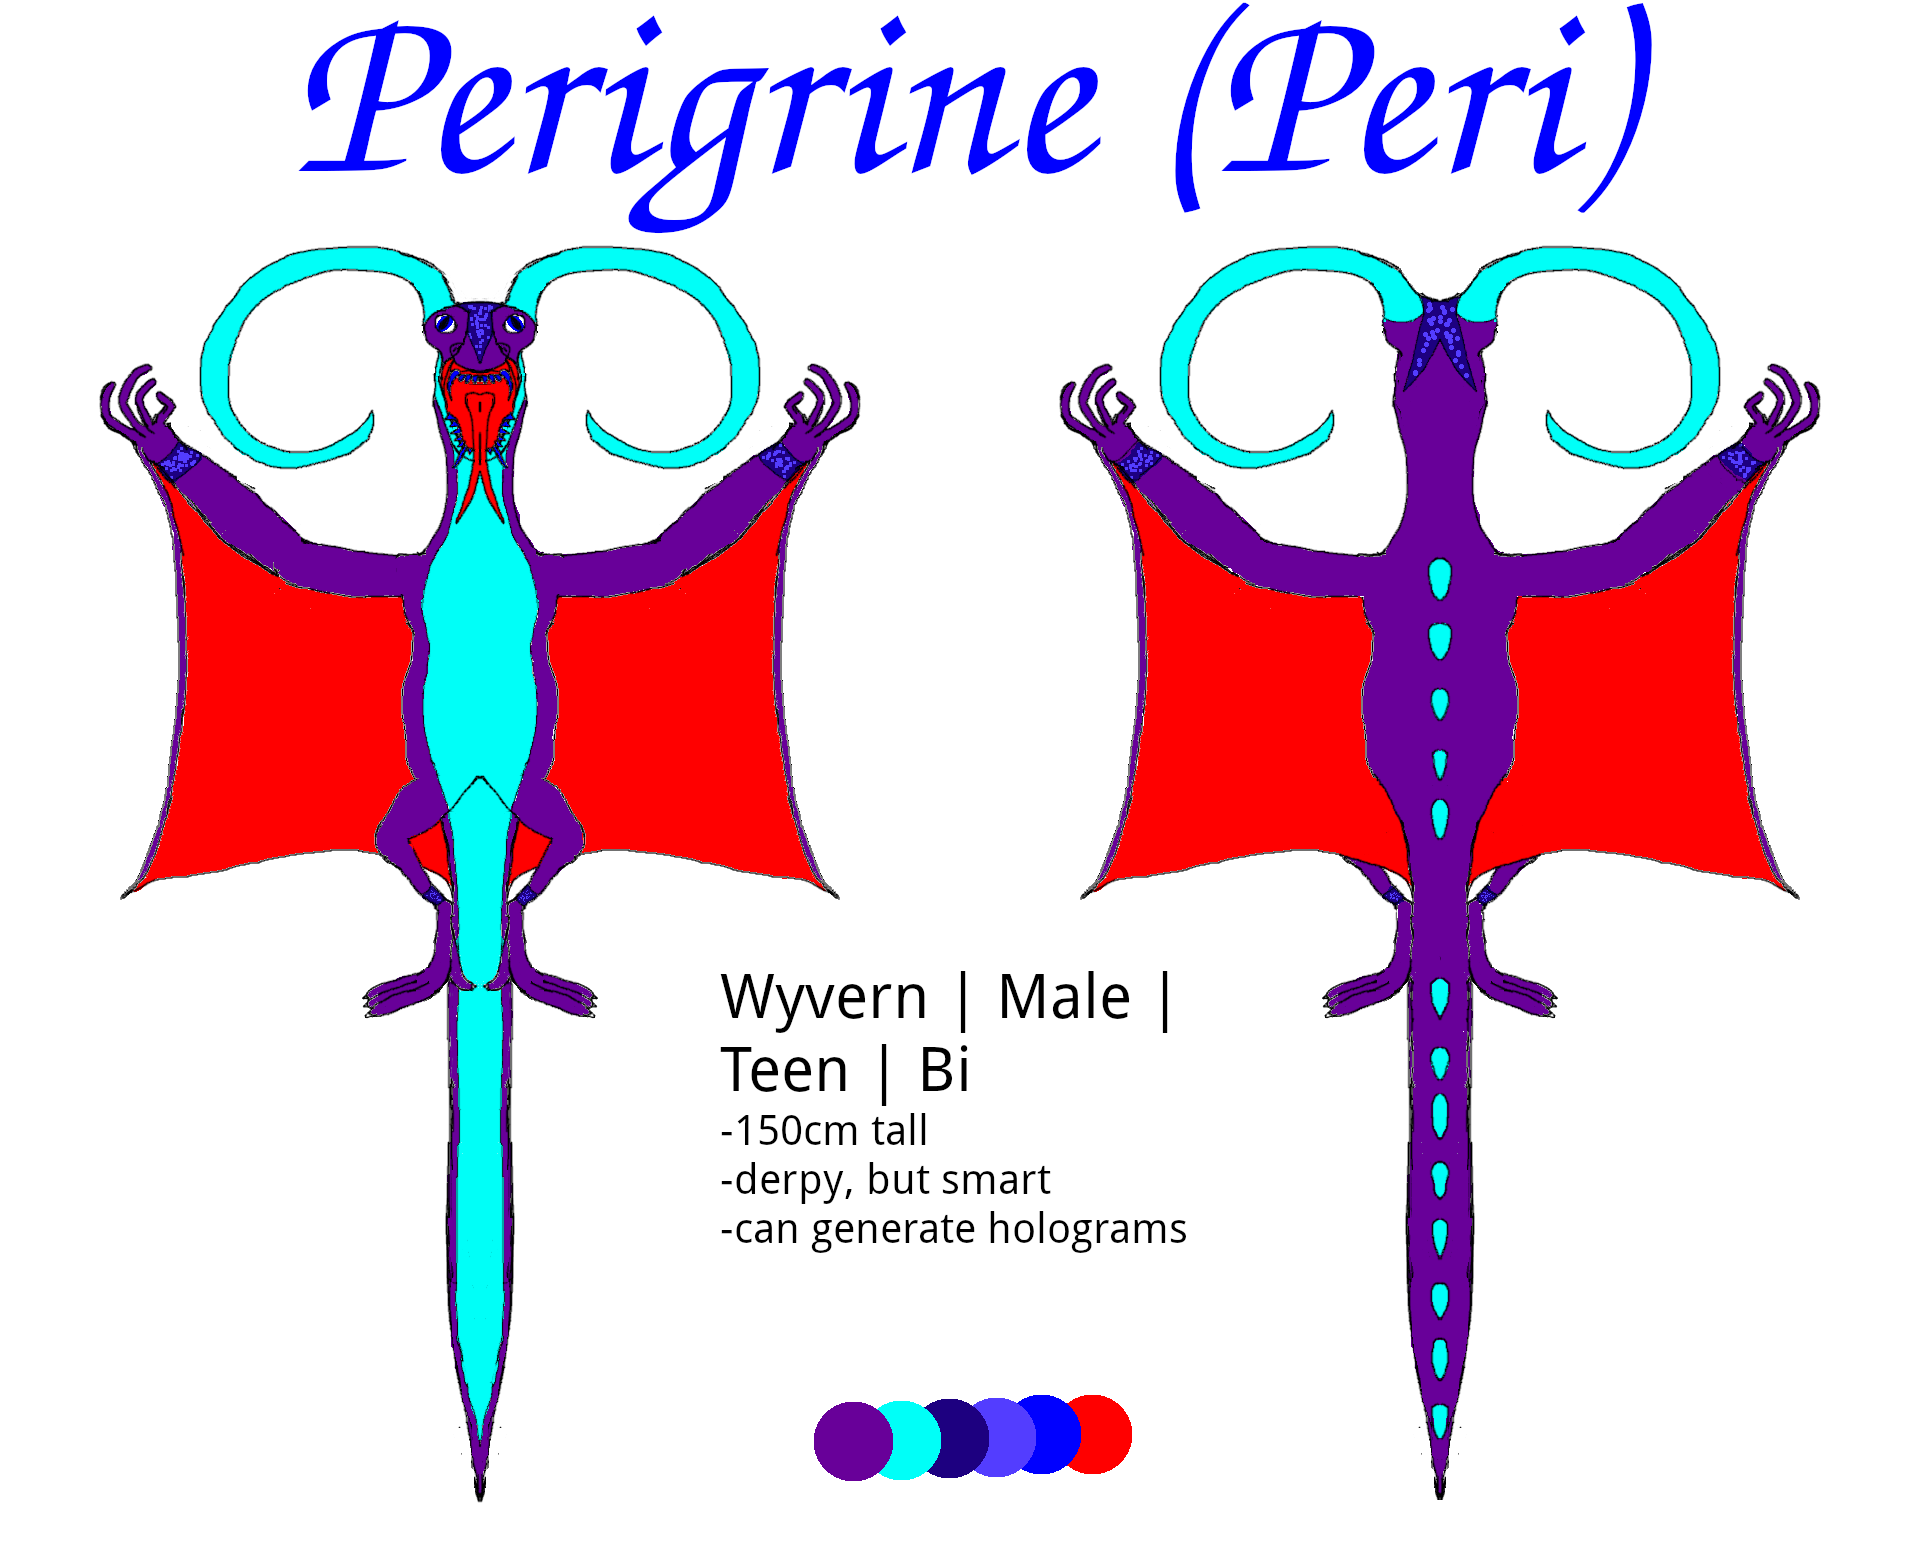 A reference sheet for a wyvern: Peregrine. The wyvern is purple with a bright teal underbelly and ram horns. His wings are bright red. He has sparkly indigo scales on top of his head and on his wrists and ankles.